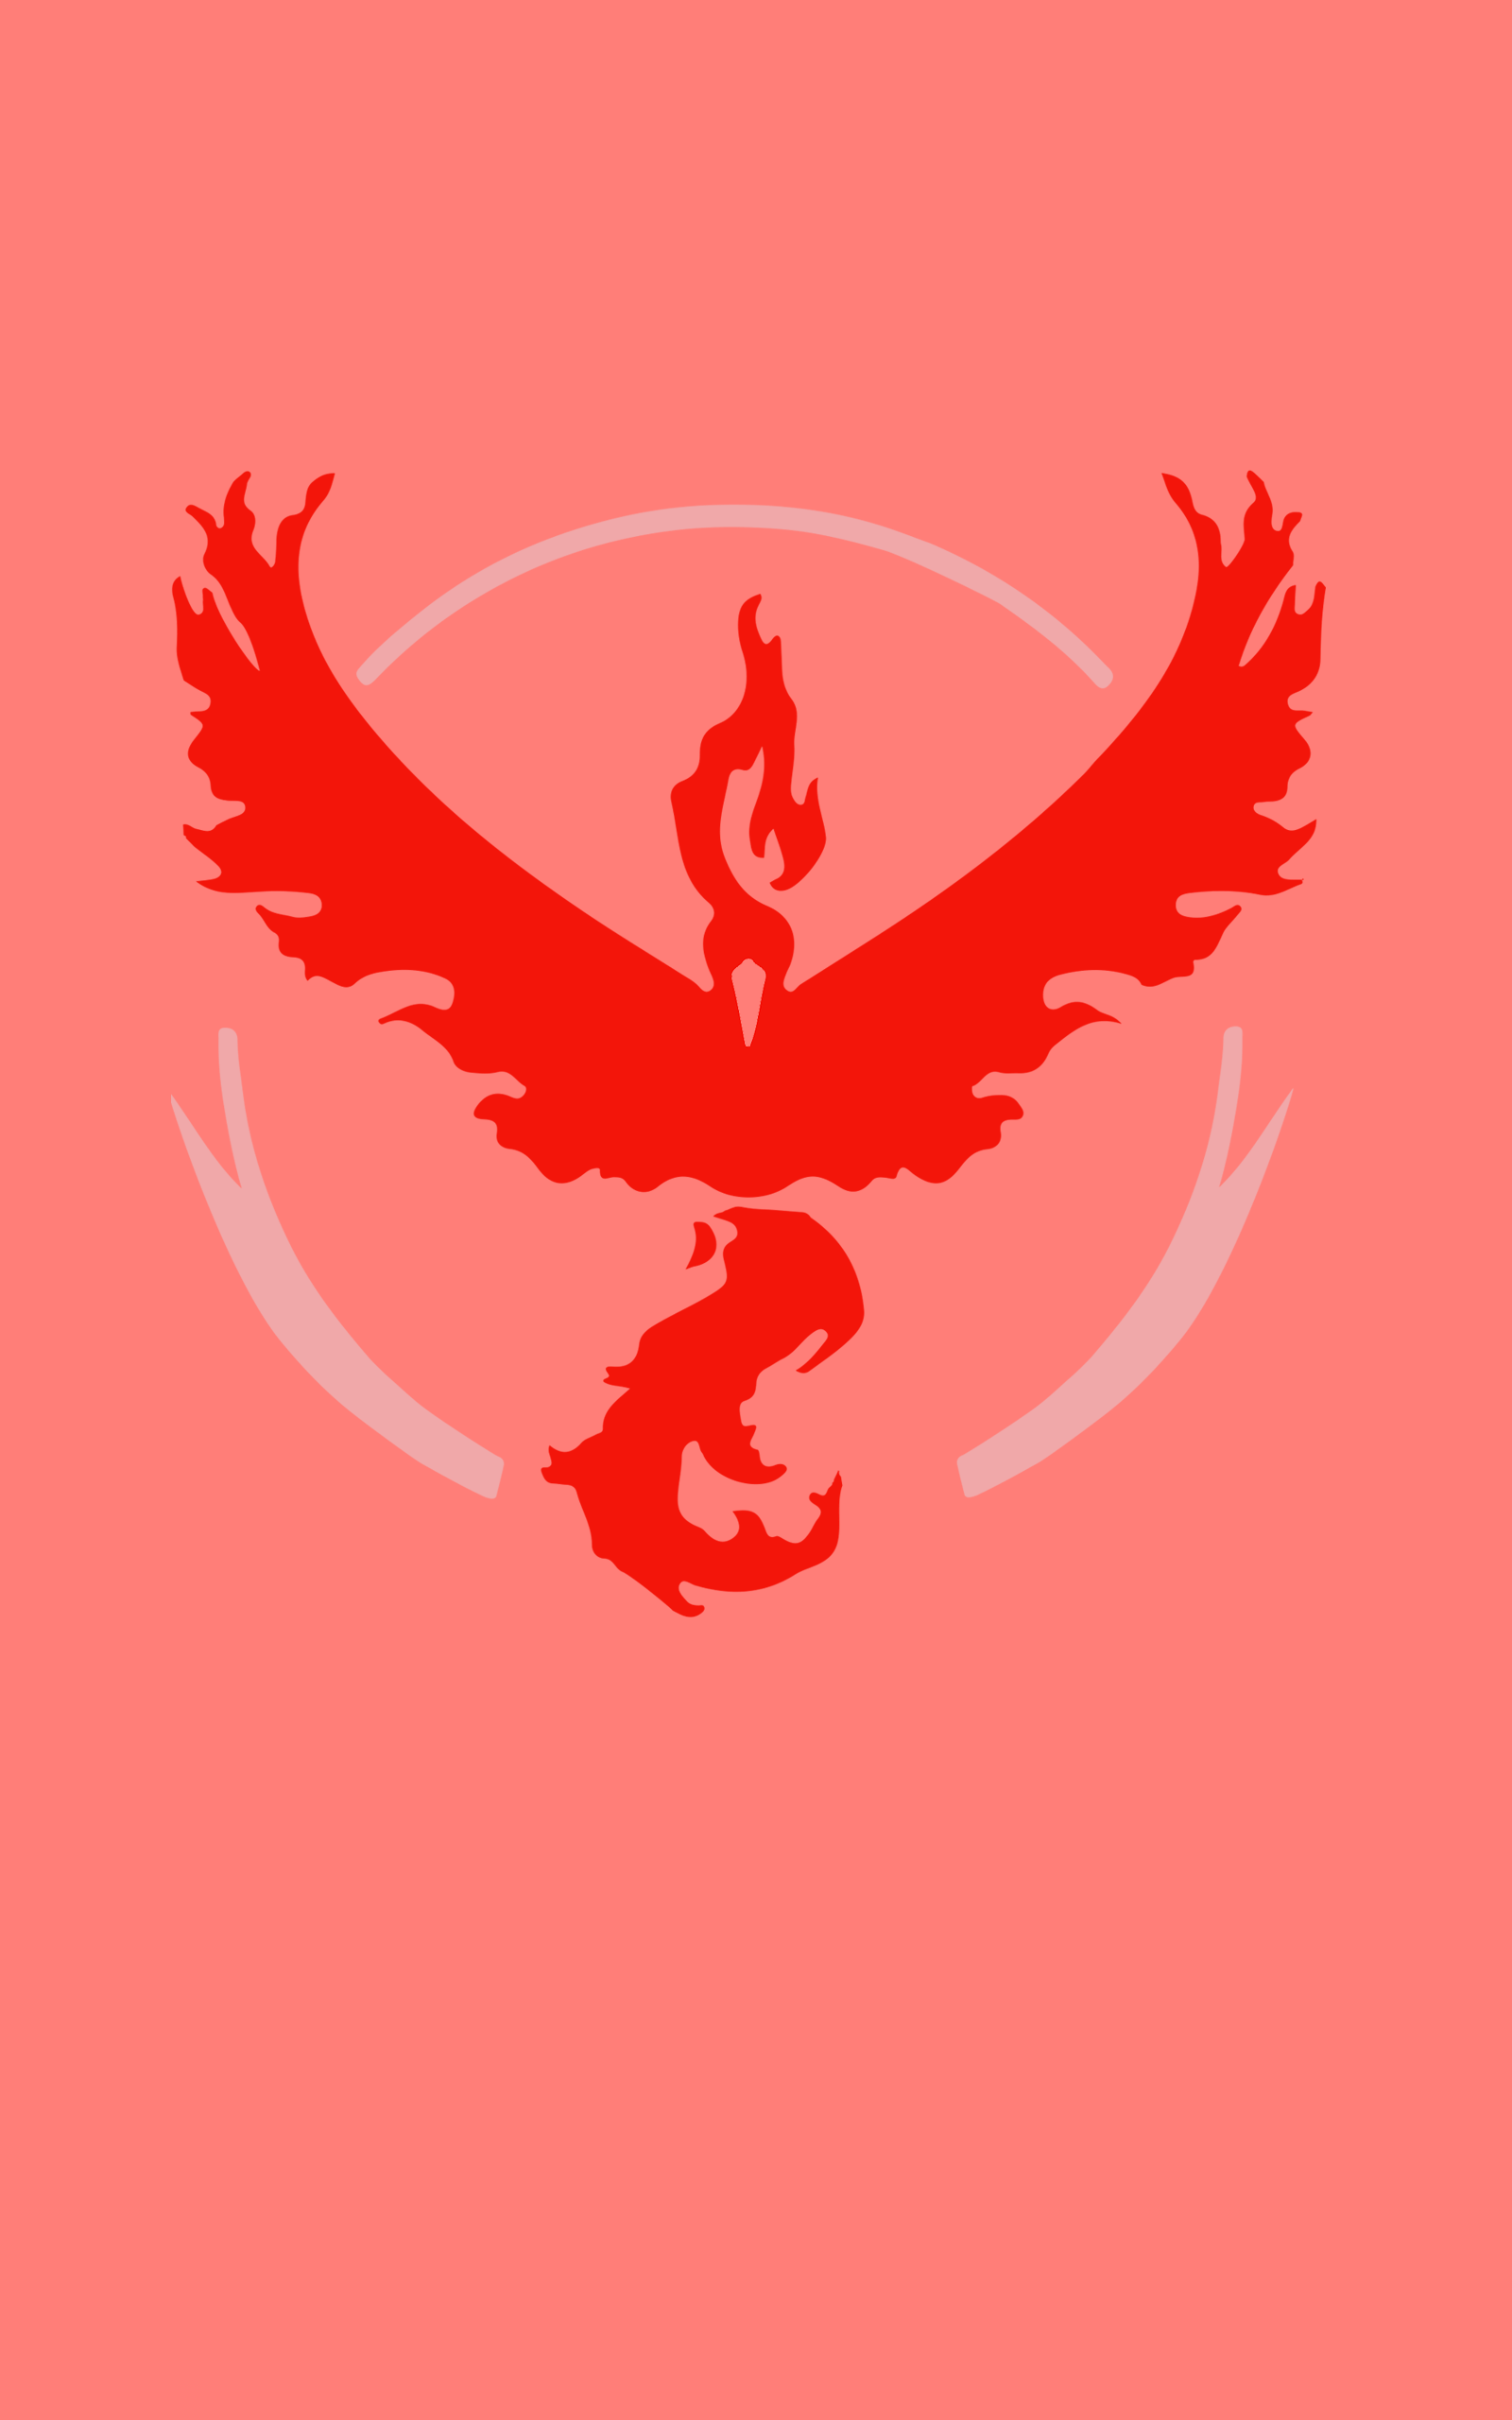 Made some team valor iPhone wallpaper